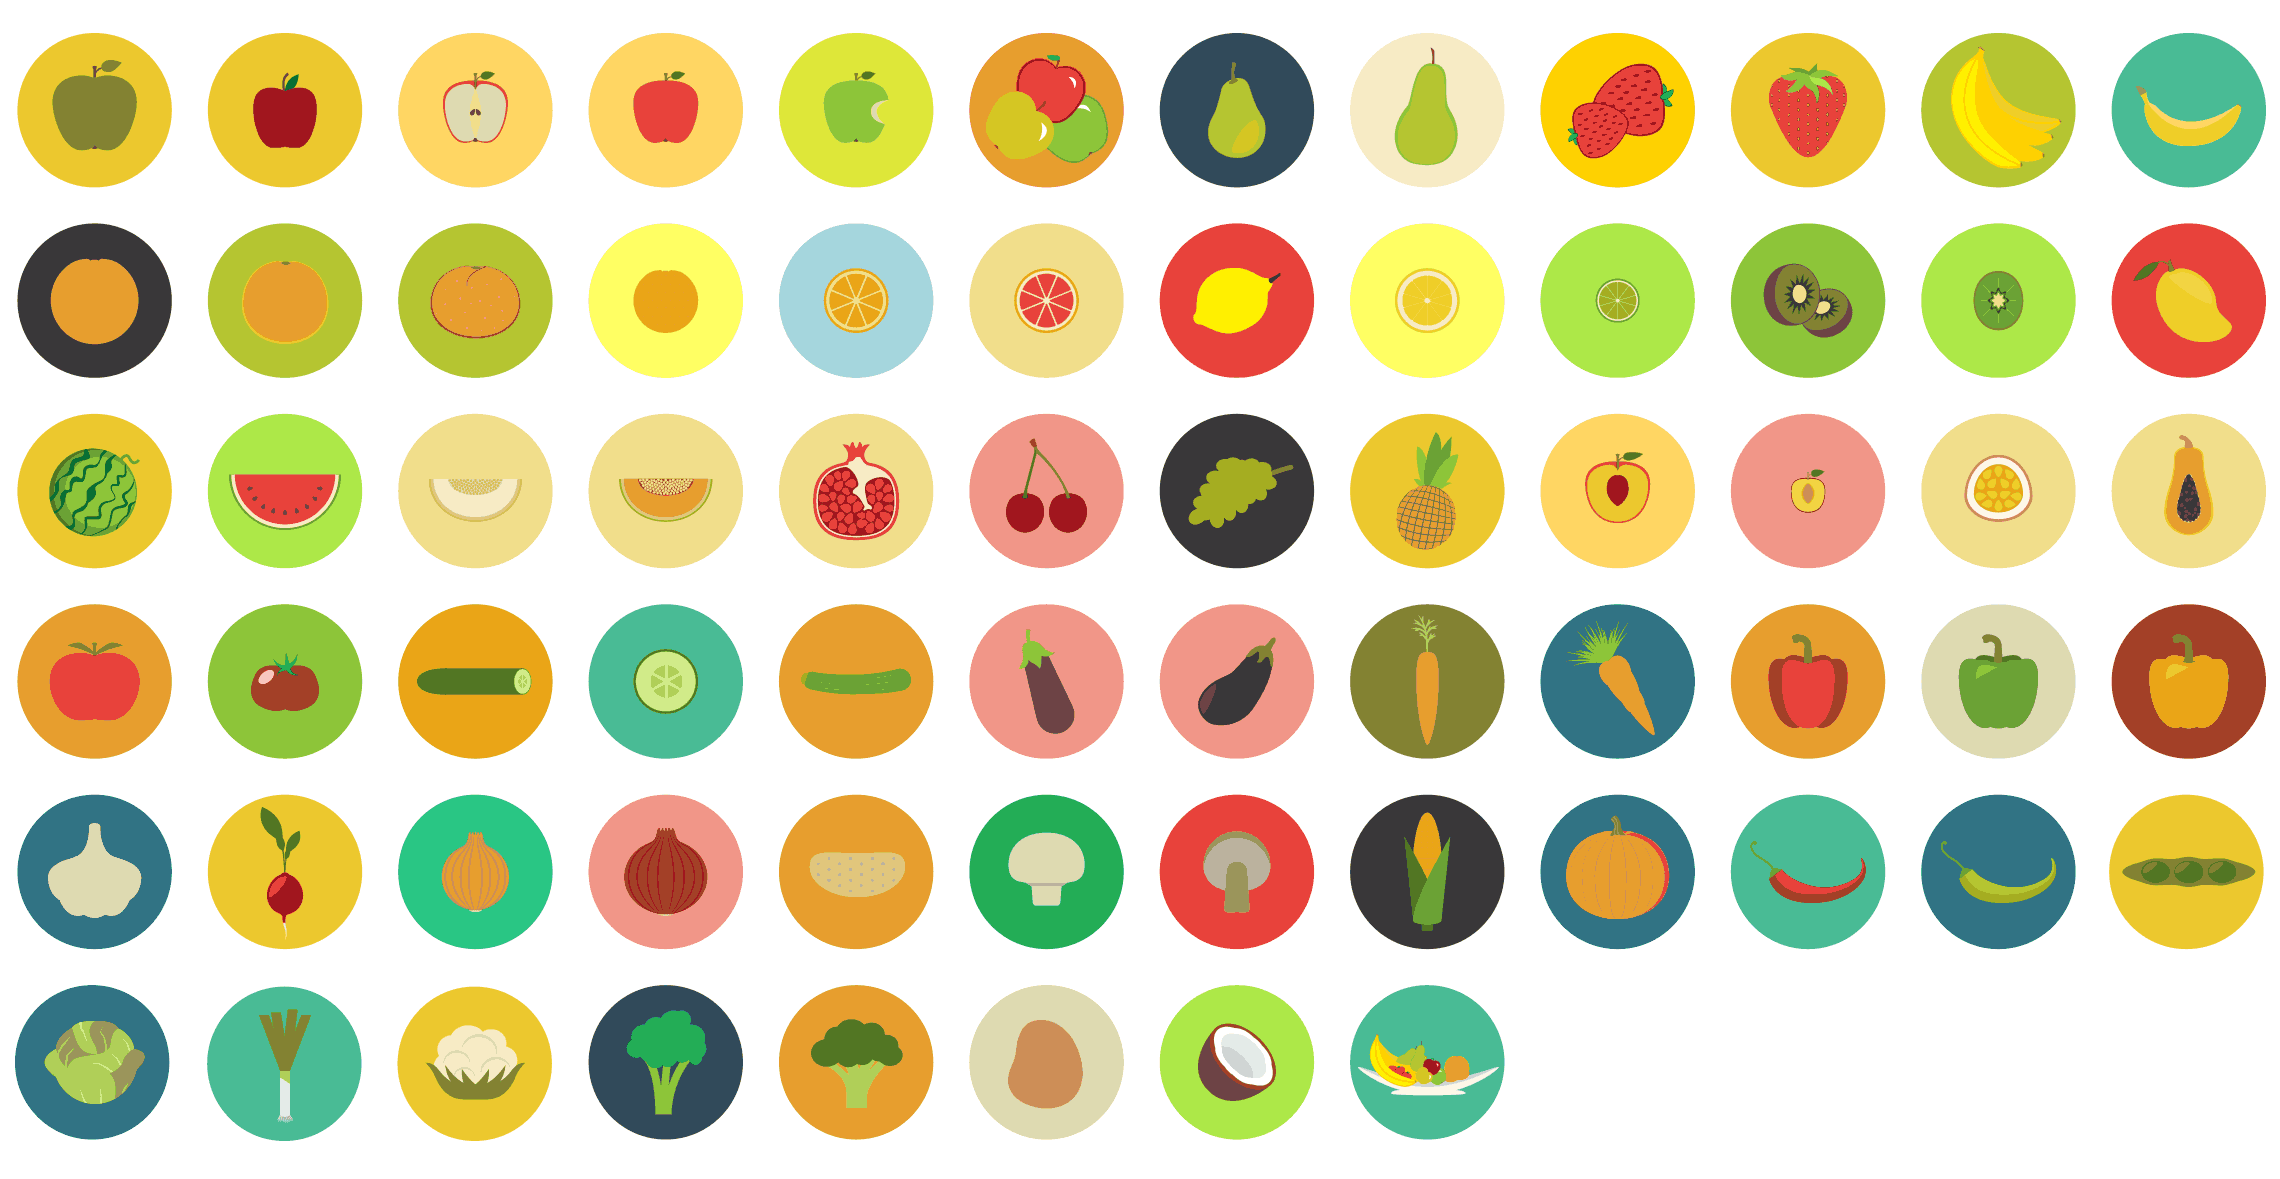 fruits-and-vegetables-flat-icons-vol-1-preview